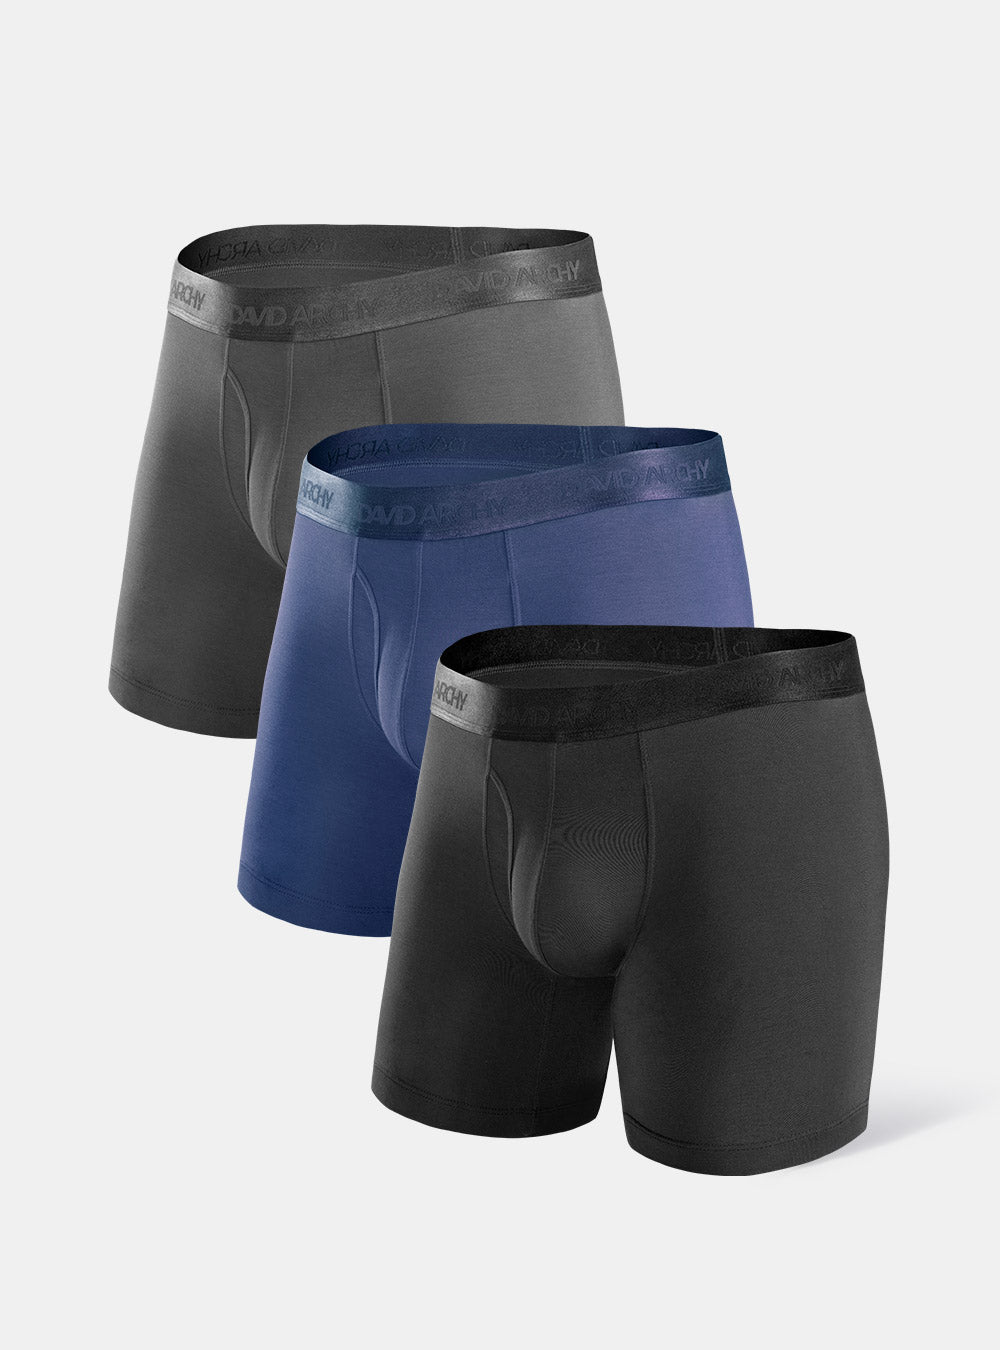 3 Packs Boxer Briefs Separate Pouch With Fly Modal David Archy Comfortable  Breathable Underwear For Men